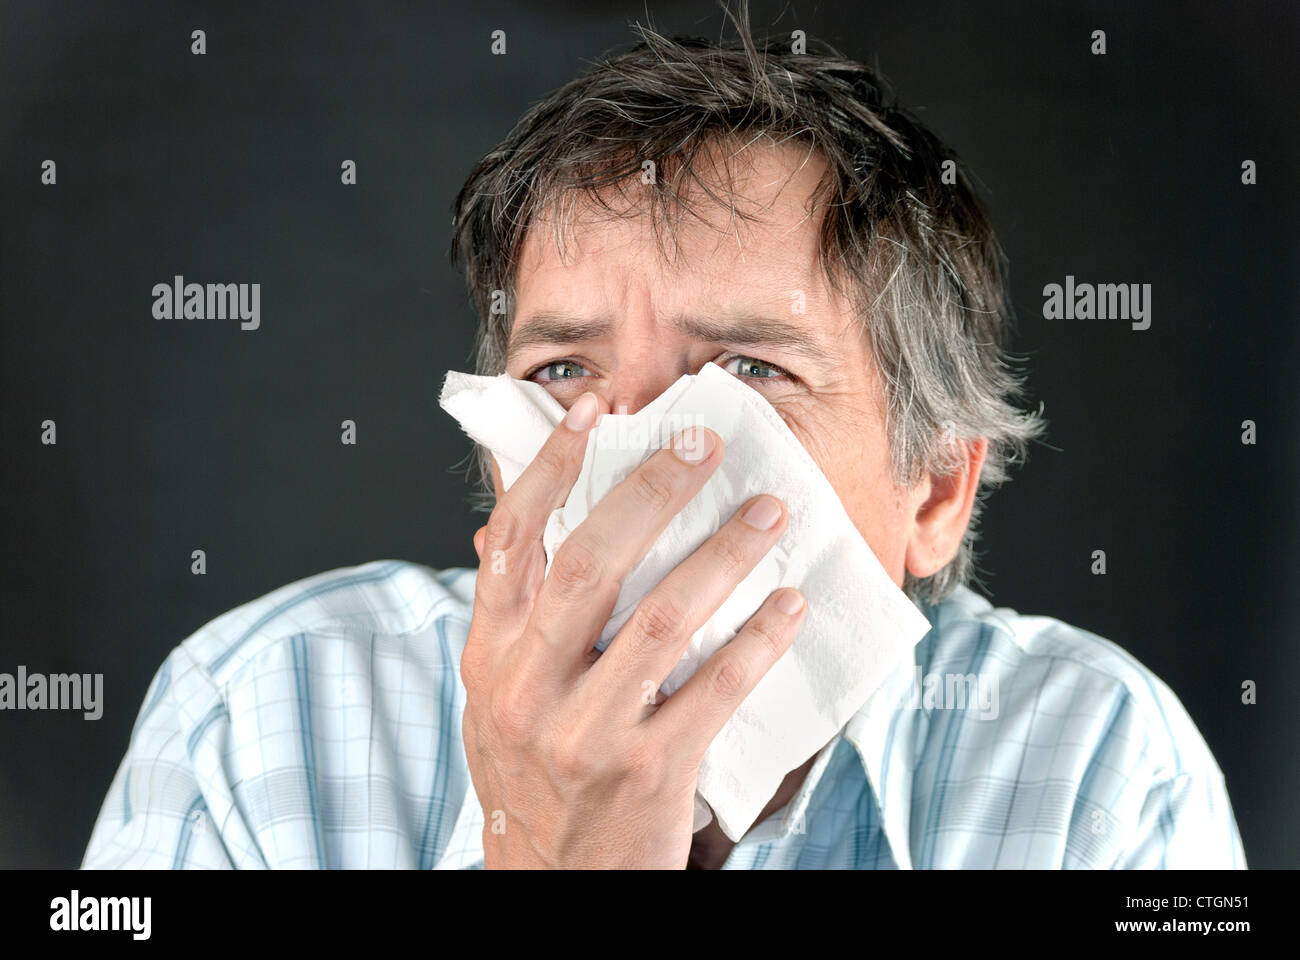 Close-up of a man sneezing into a tissue. Stock Photo